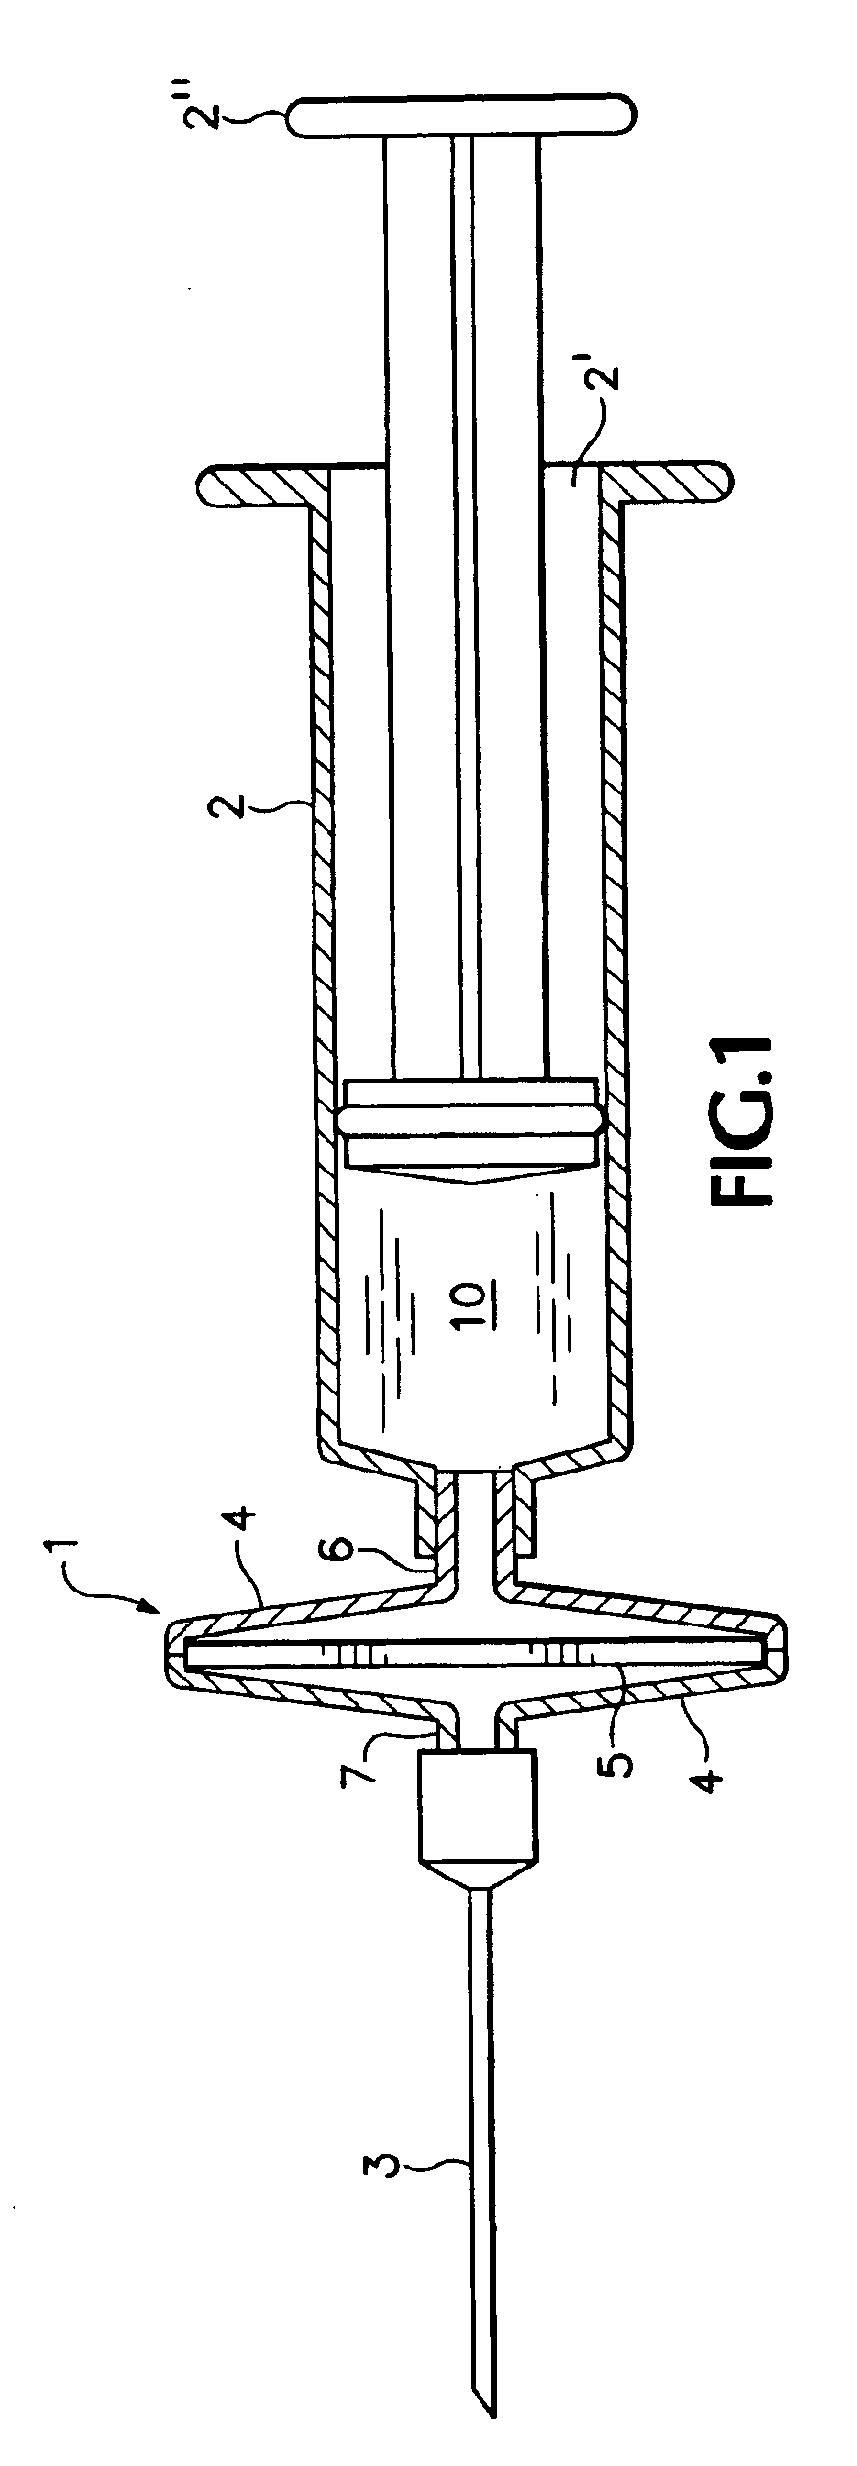 Genetic vaccination device and process for forming an injection therefor